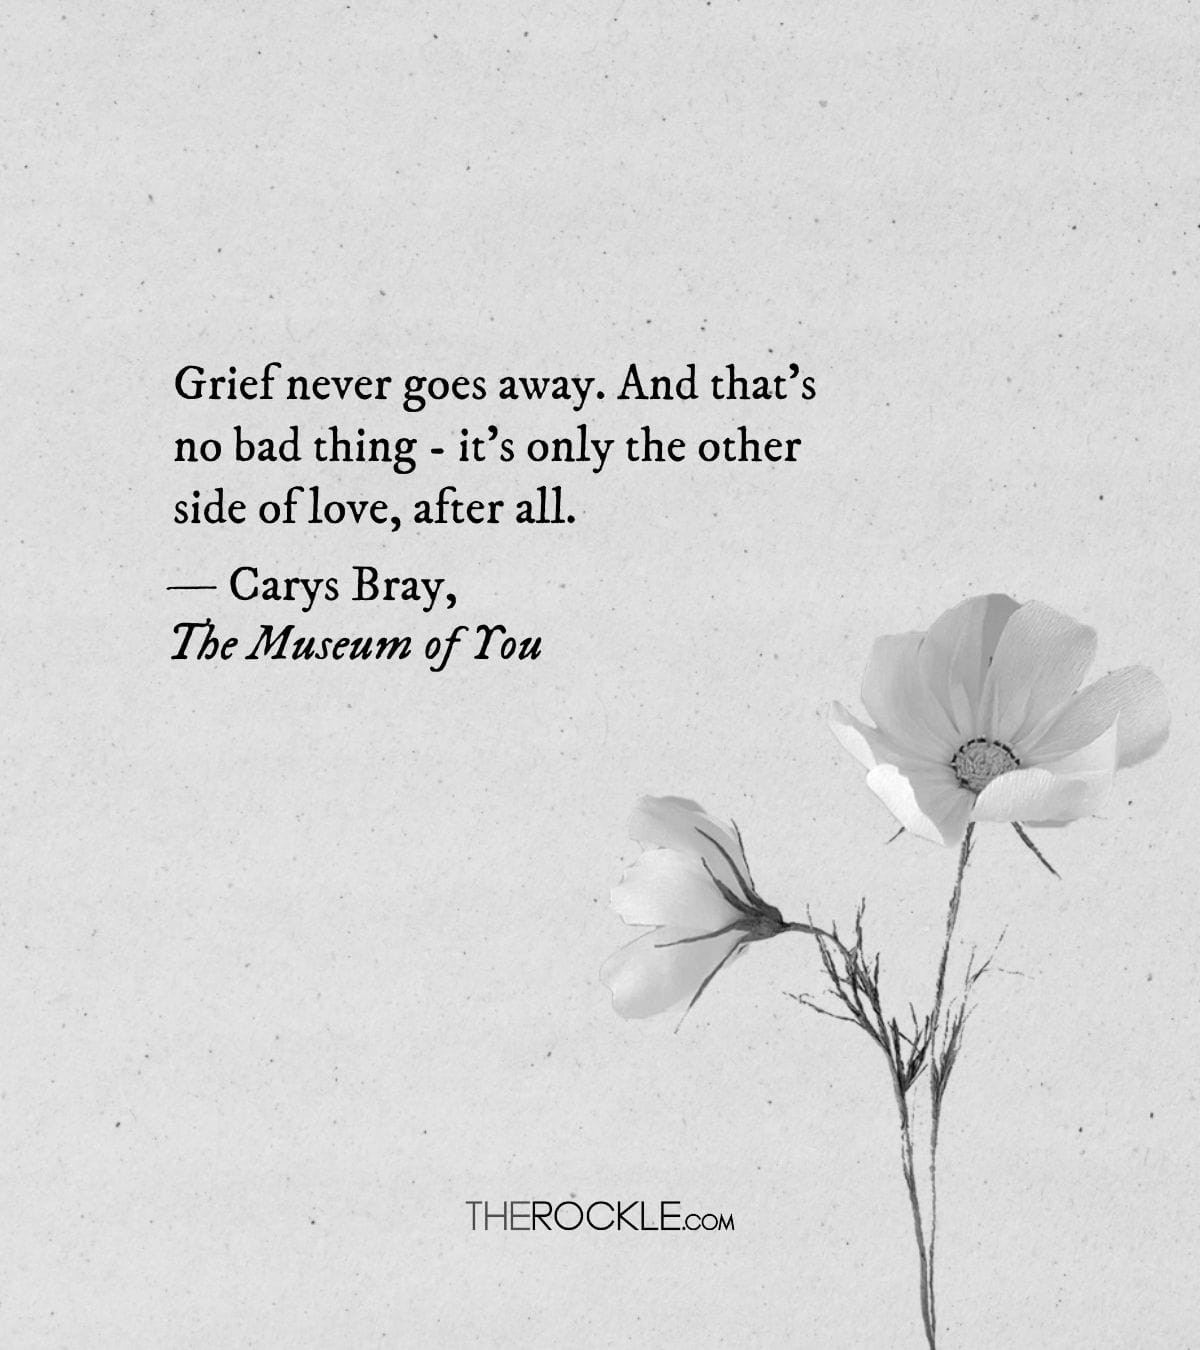 Carys Bray's quote on the connection between grief and love